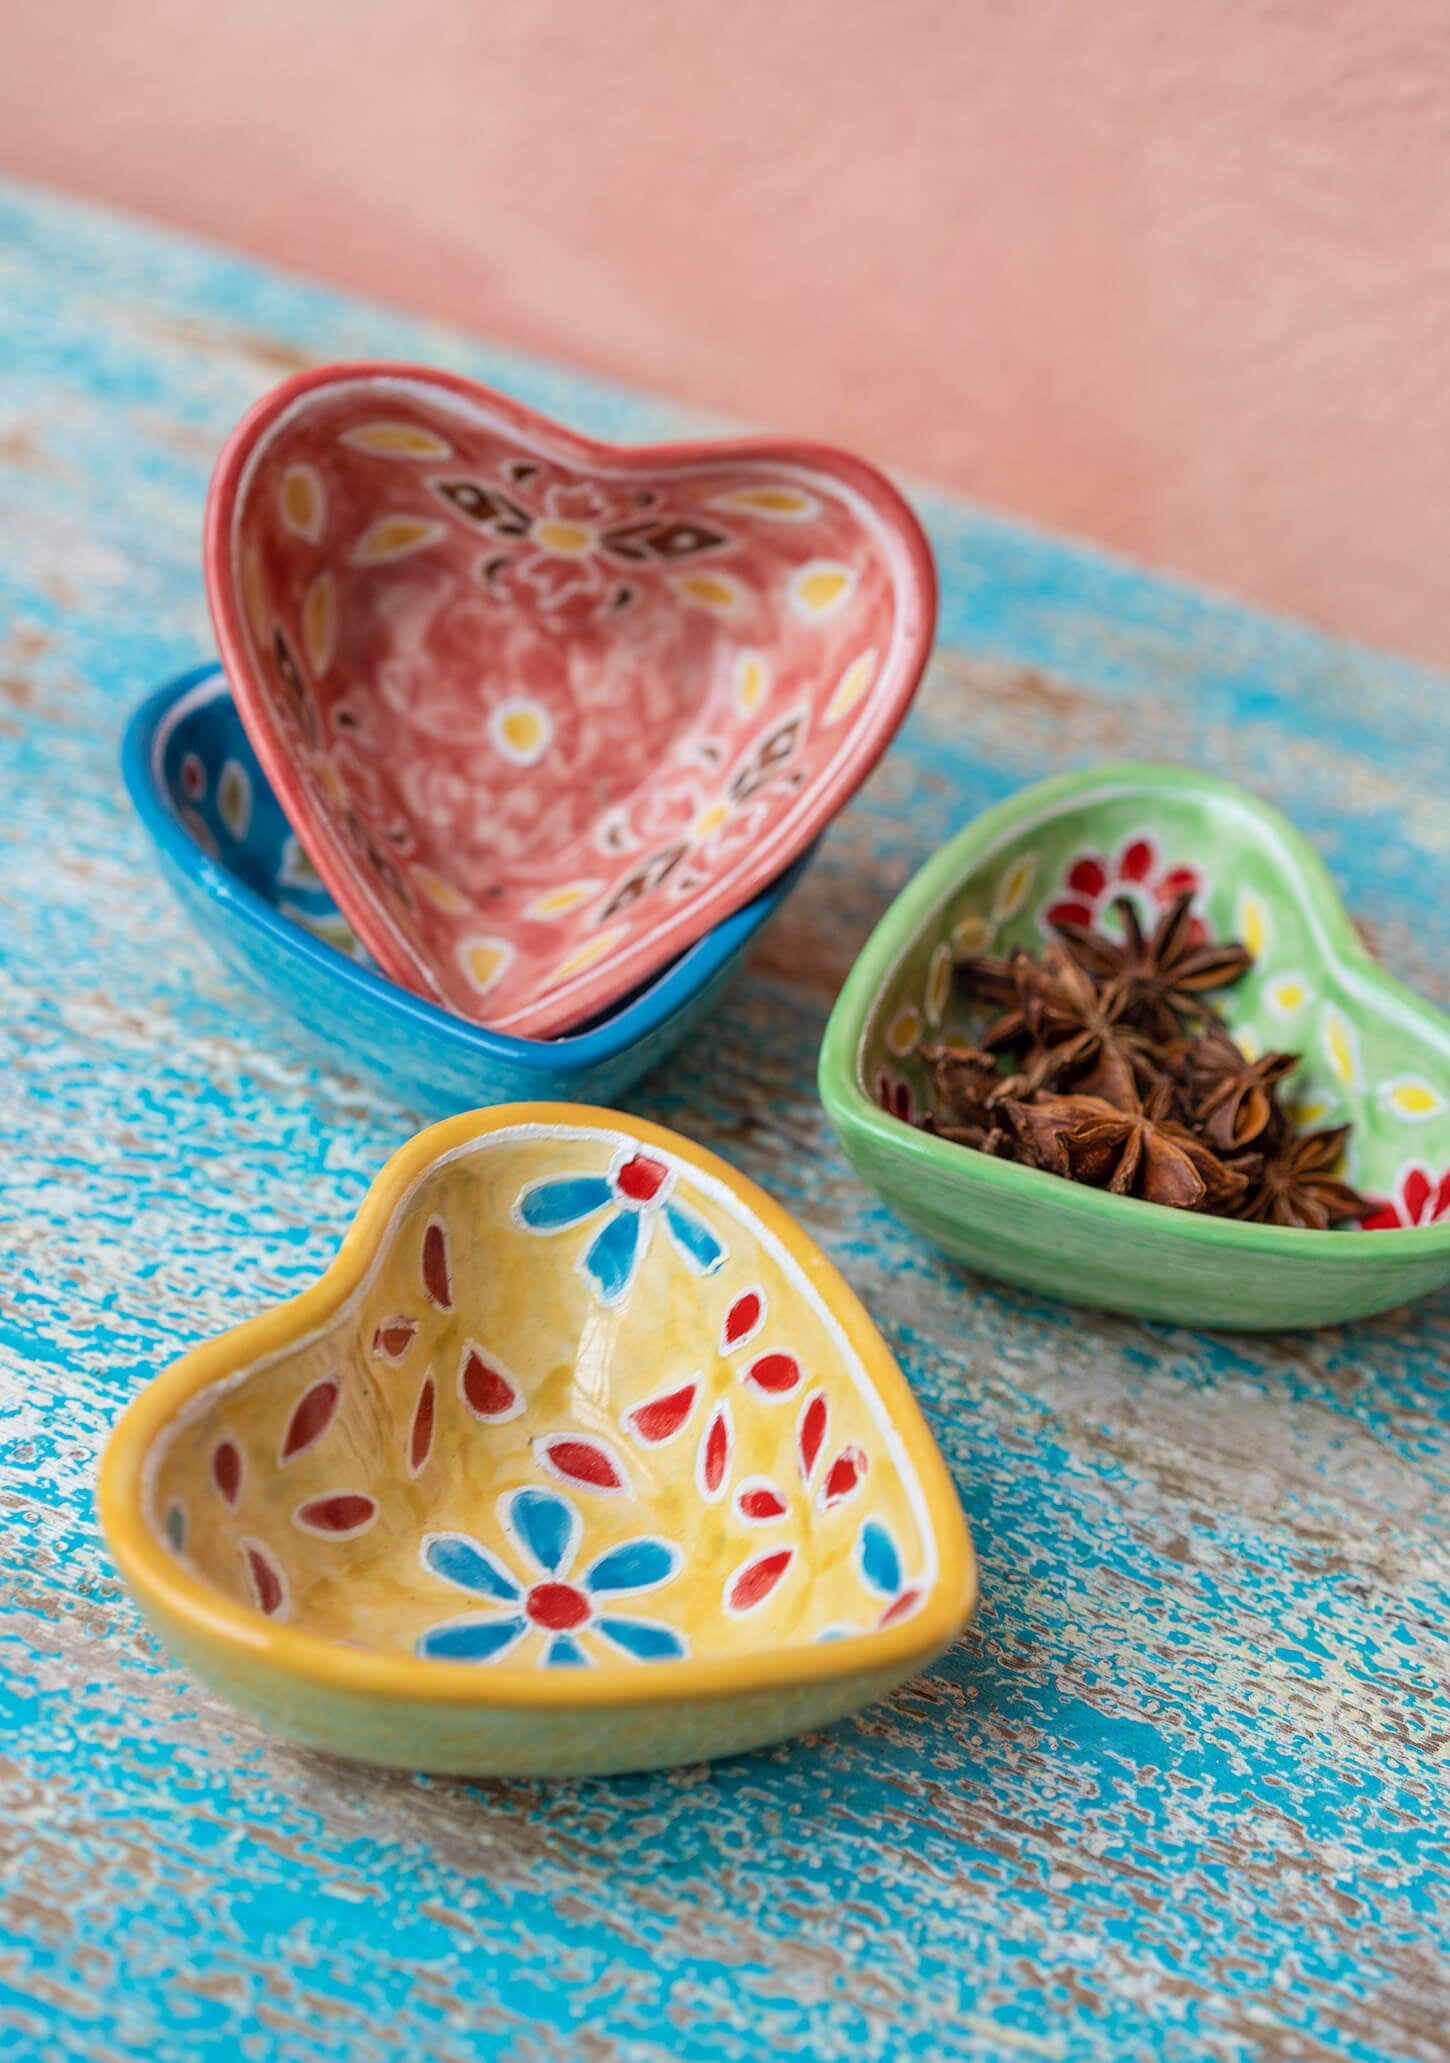 colorful heart ceramic trinket dish, trinket box hand painted by artisans in india. ethical and fair trade gift for mothers day or gift for her. 